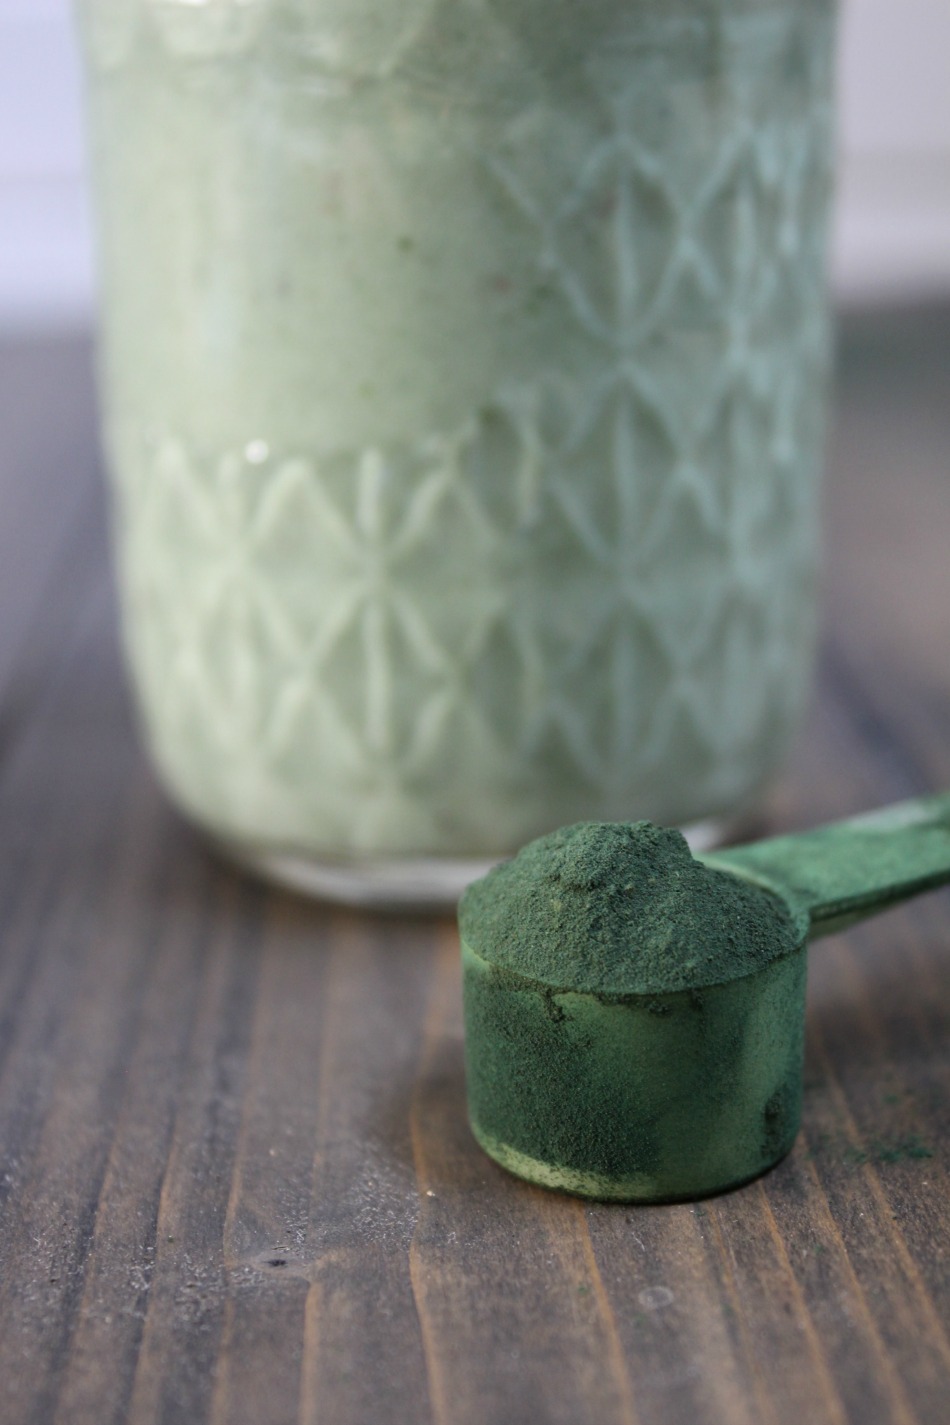 A St. Patrick's Day Green Smoothie That Tastes Great! | Growing Up Herbal | Looking for a way to make your St. Patrick's Day more festive? Give this tasty green smoothie a try!